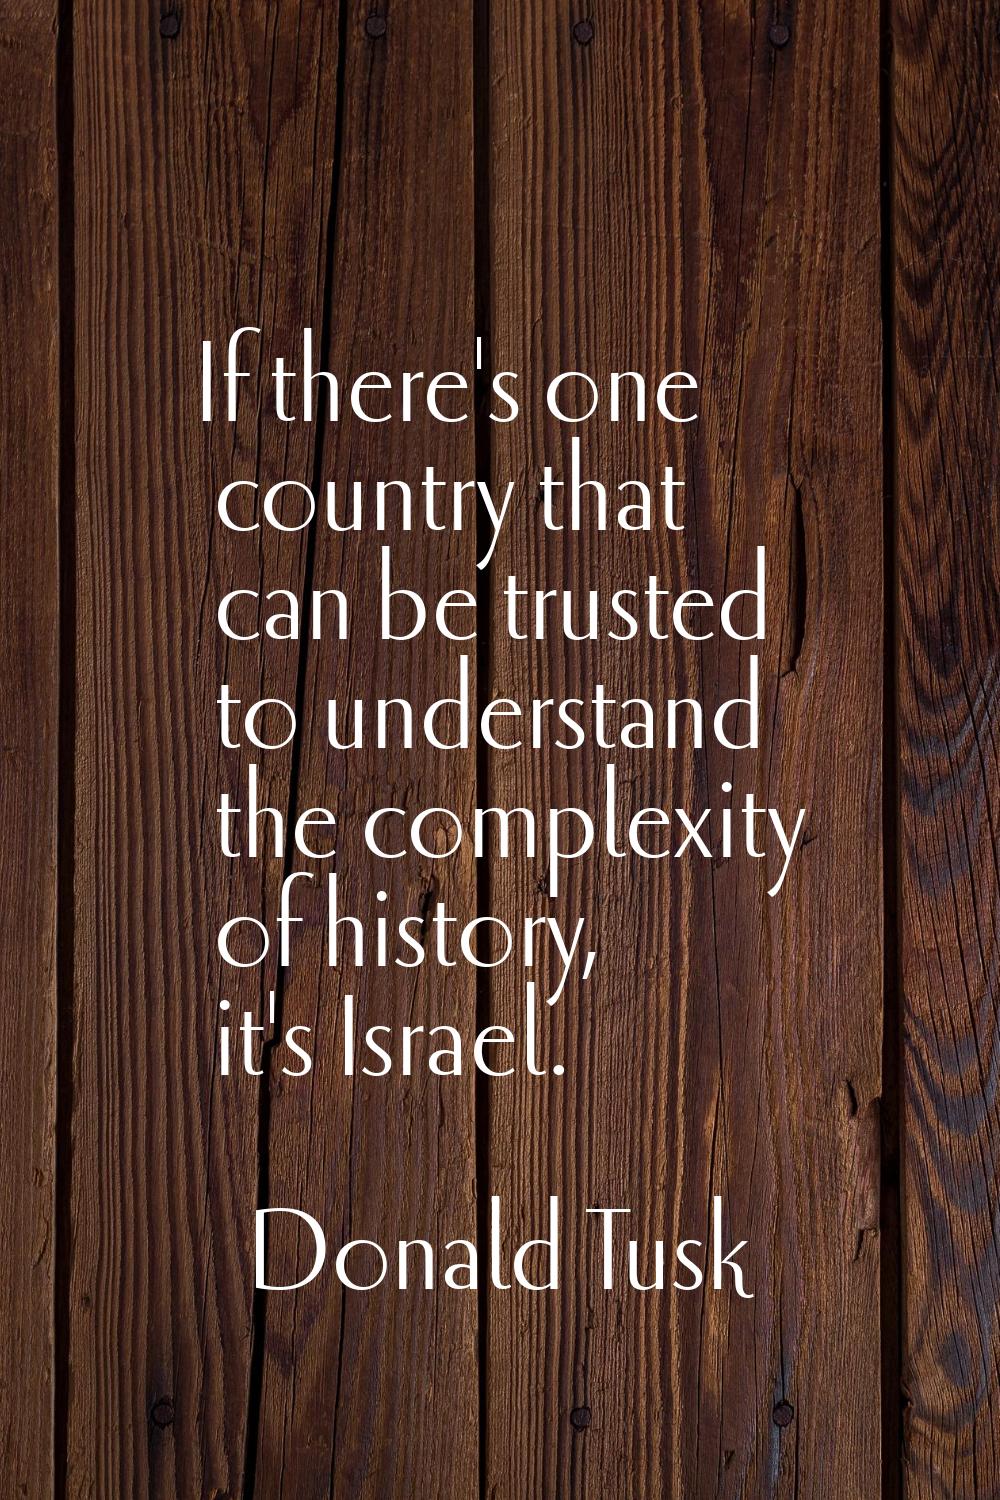 If there's one country that can be trusted to understand the complexity of history, it's Israel.